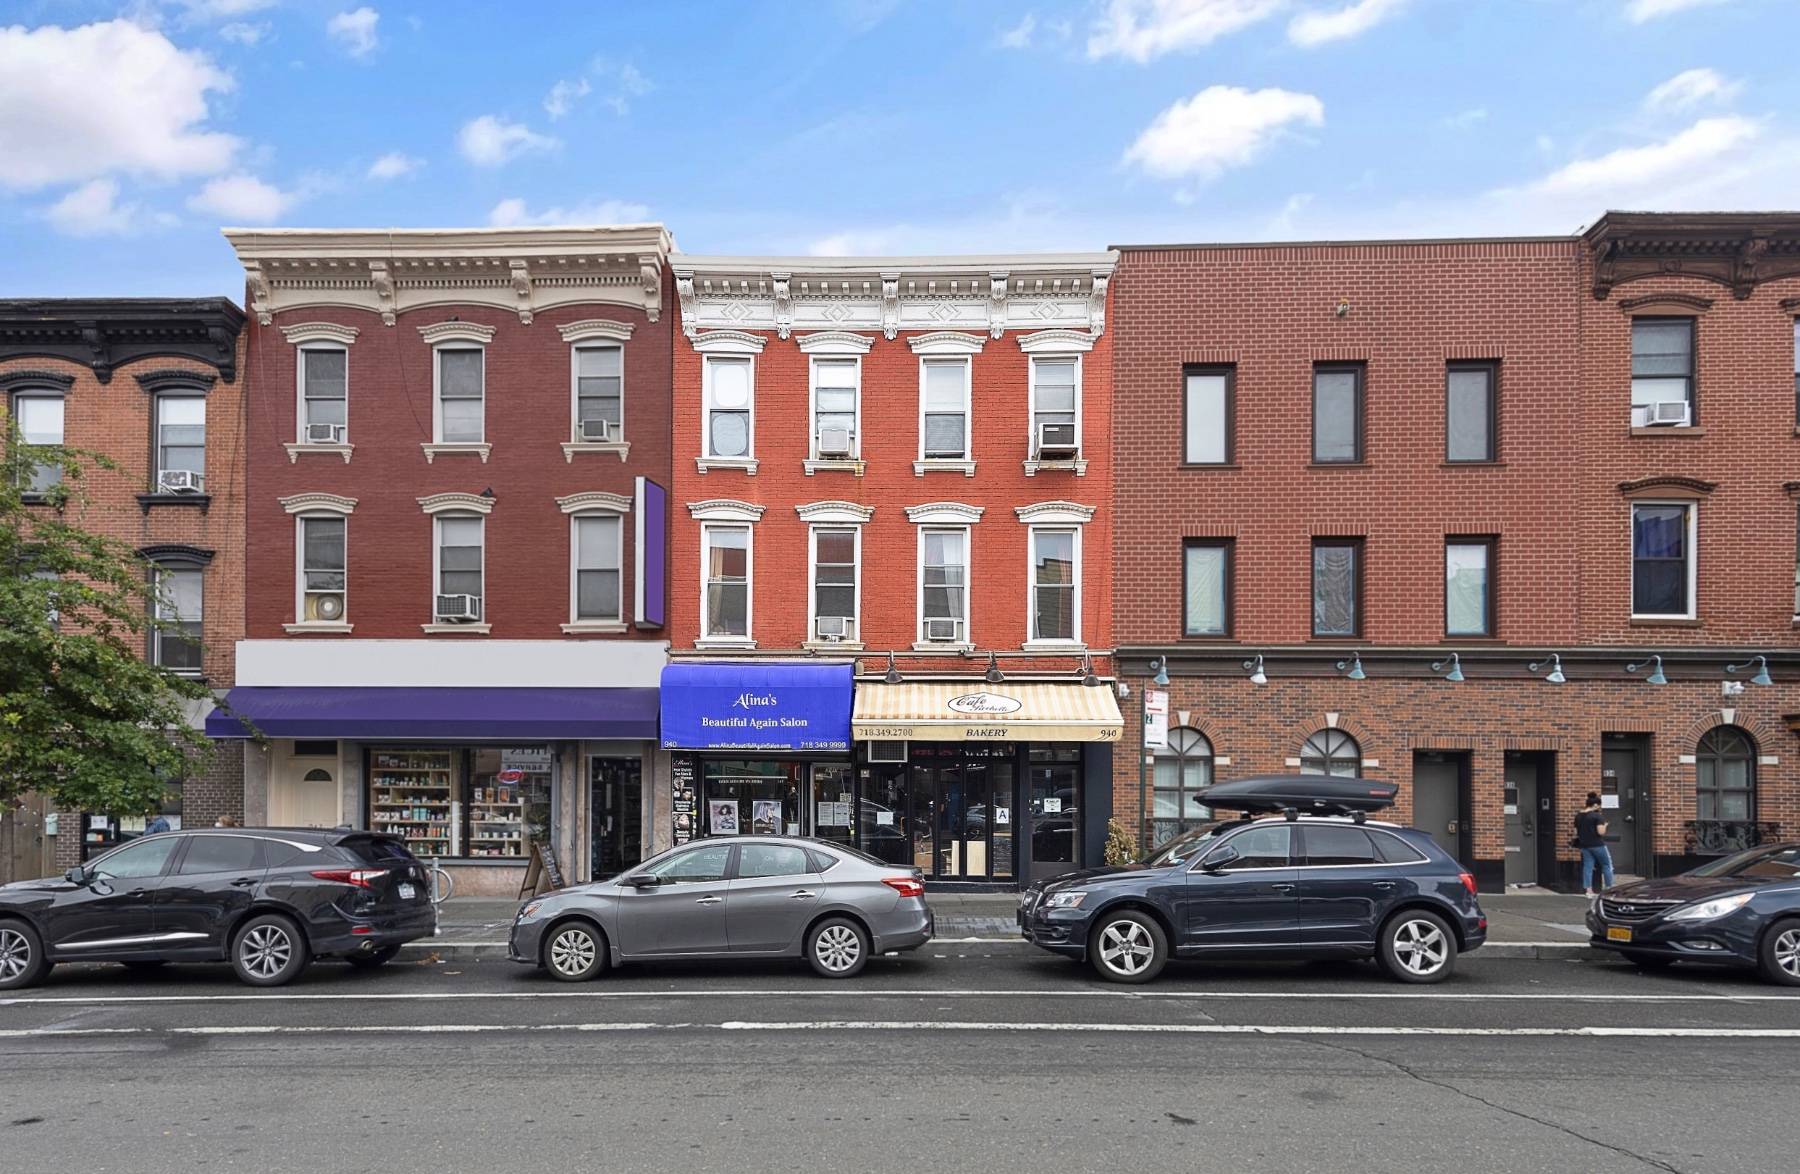 Three level income producing, mixed use brownstone, situated on a 25x100 feet lot with commercial buildouts and additional buidable air rights.